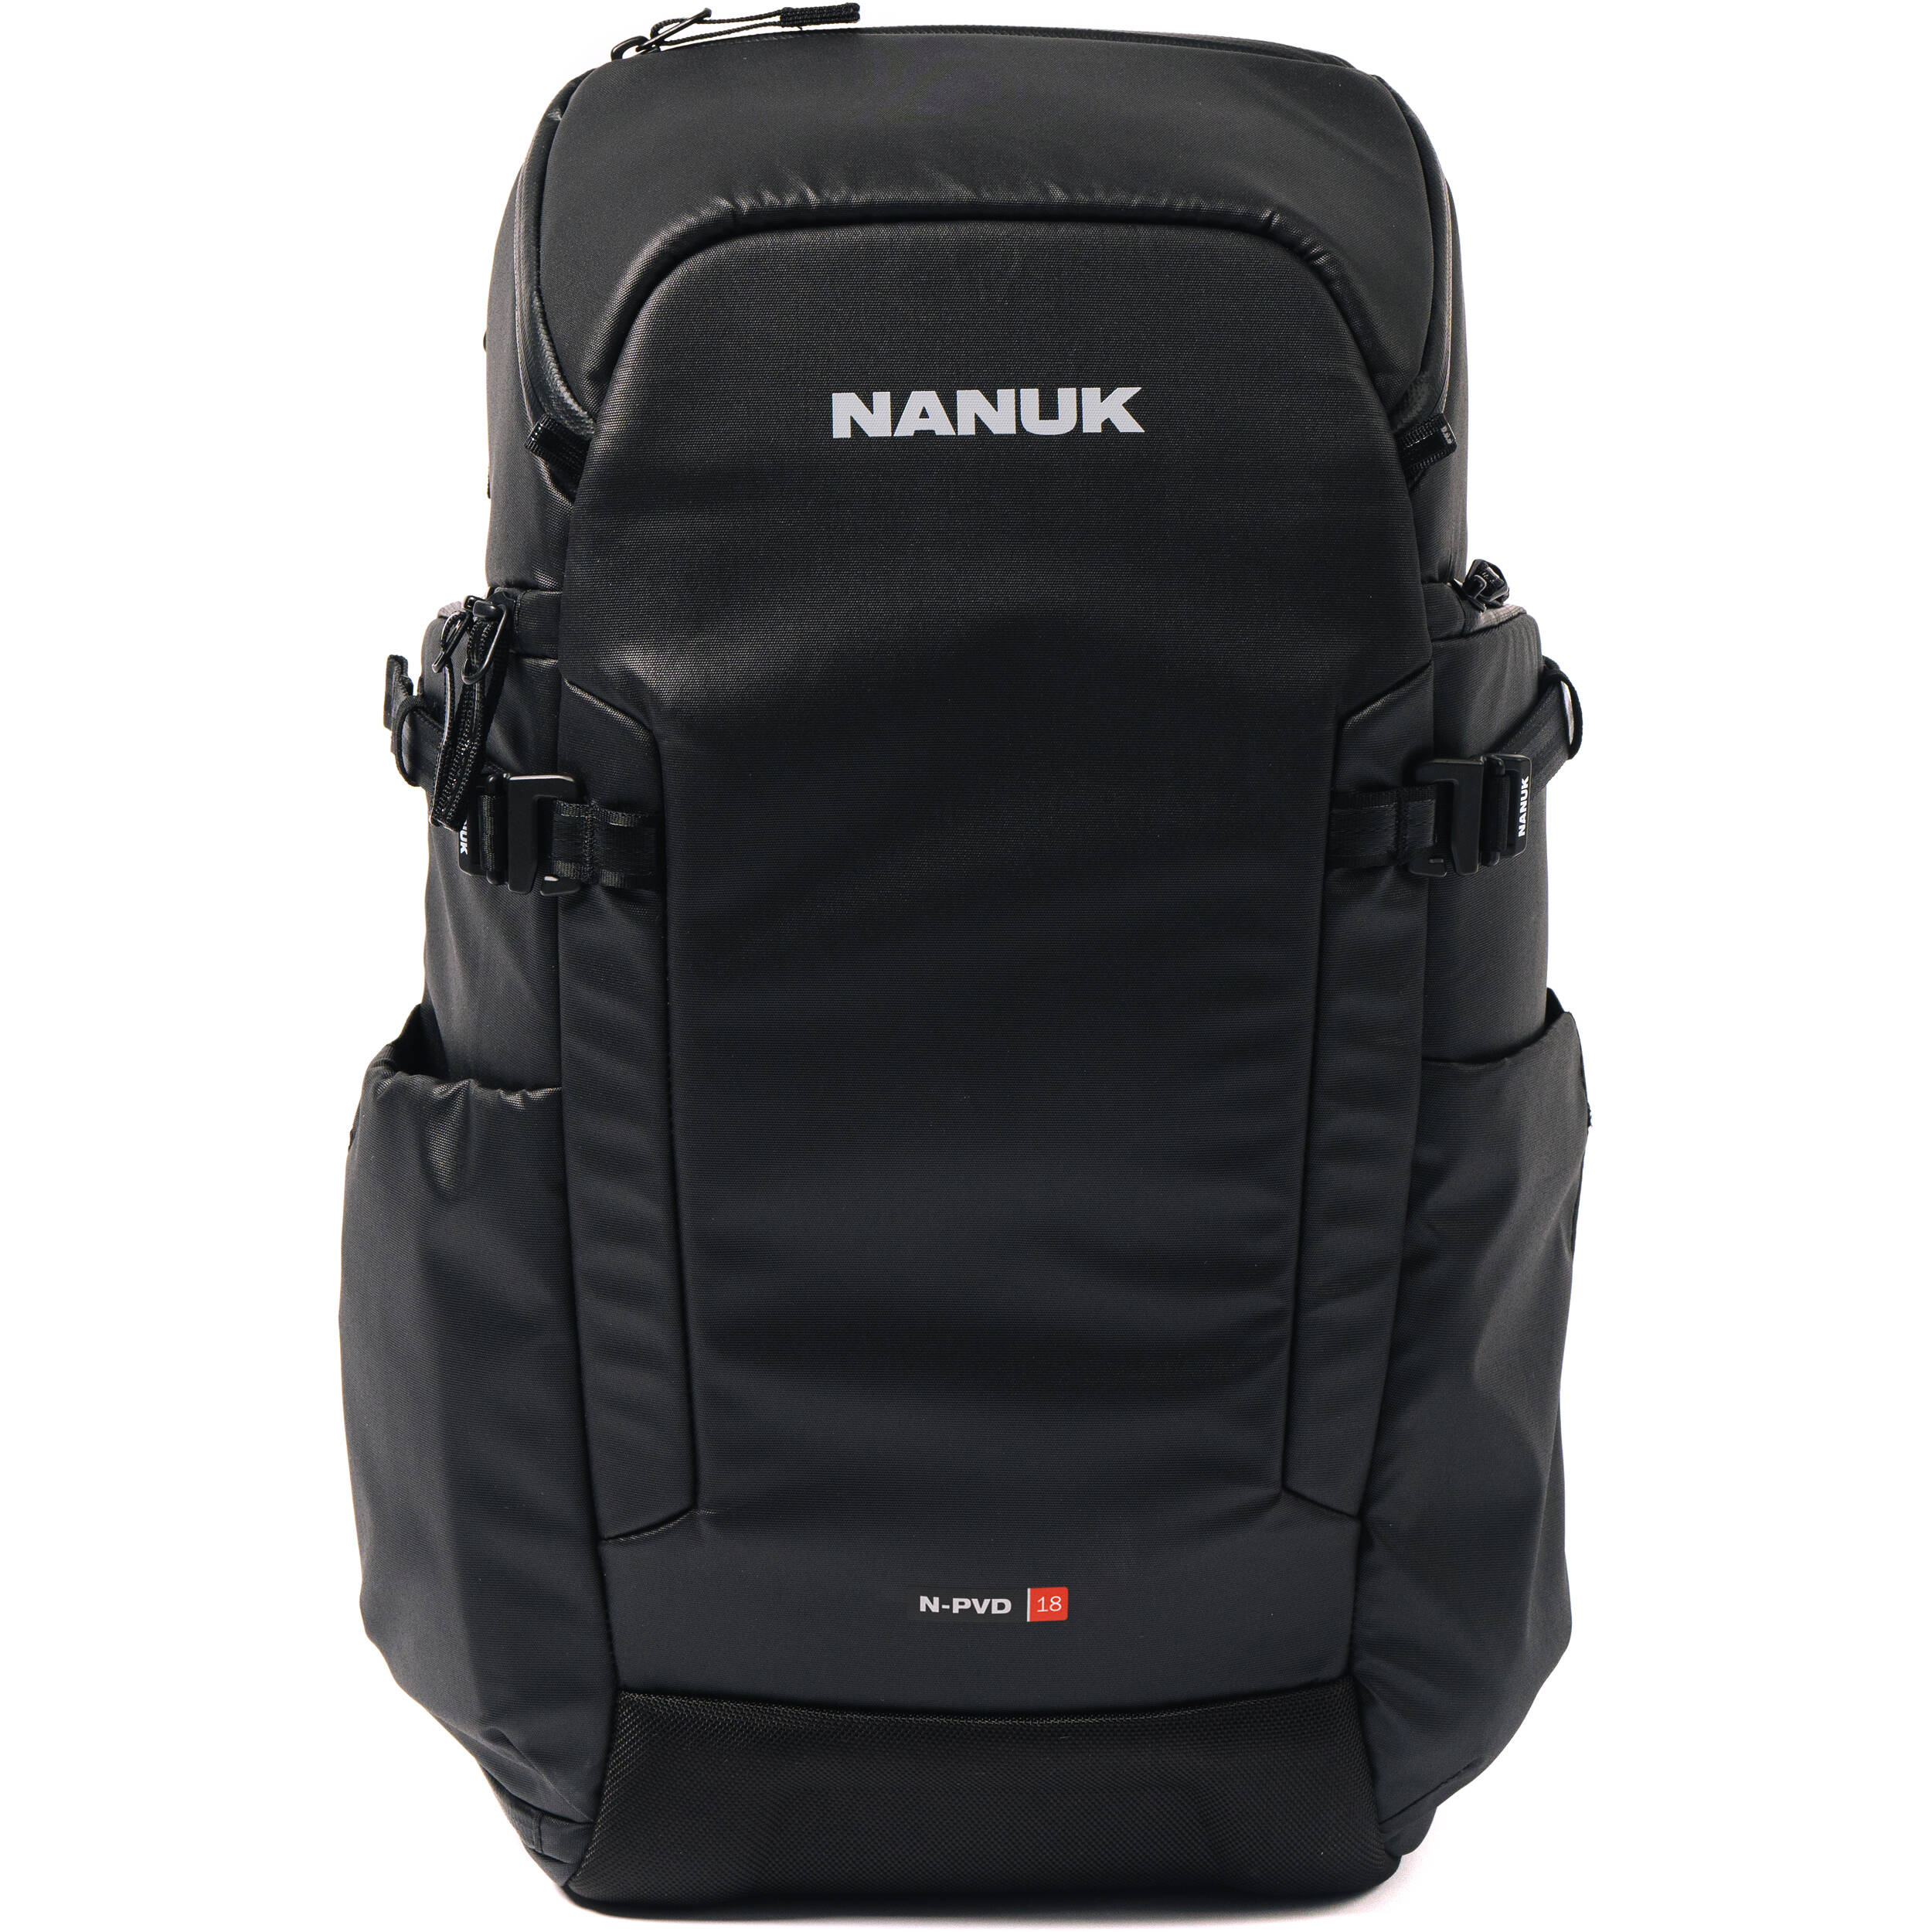 Nanuk N-PVD Backpack for Photo, Video, Drone, and Laptop (Black, 18L)